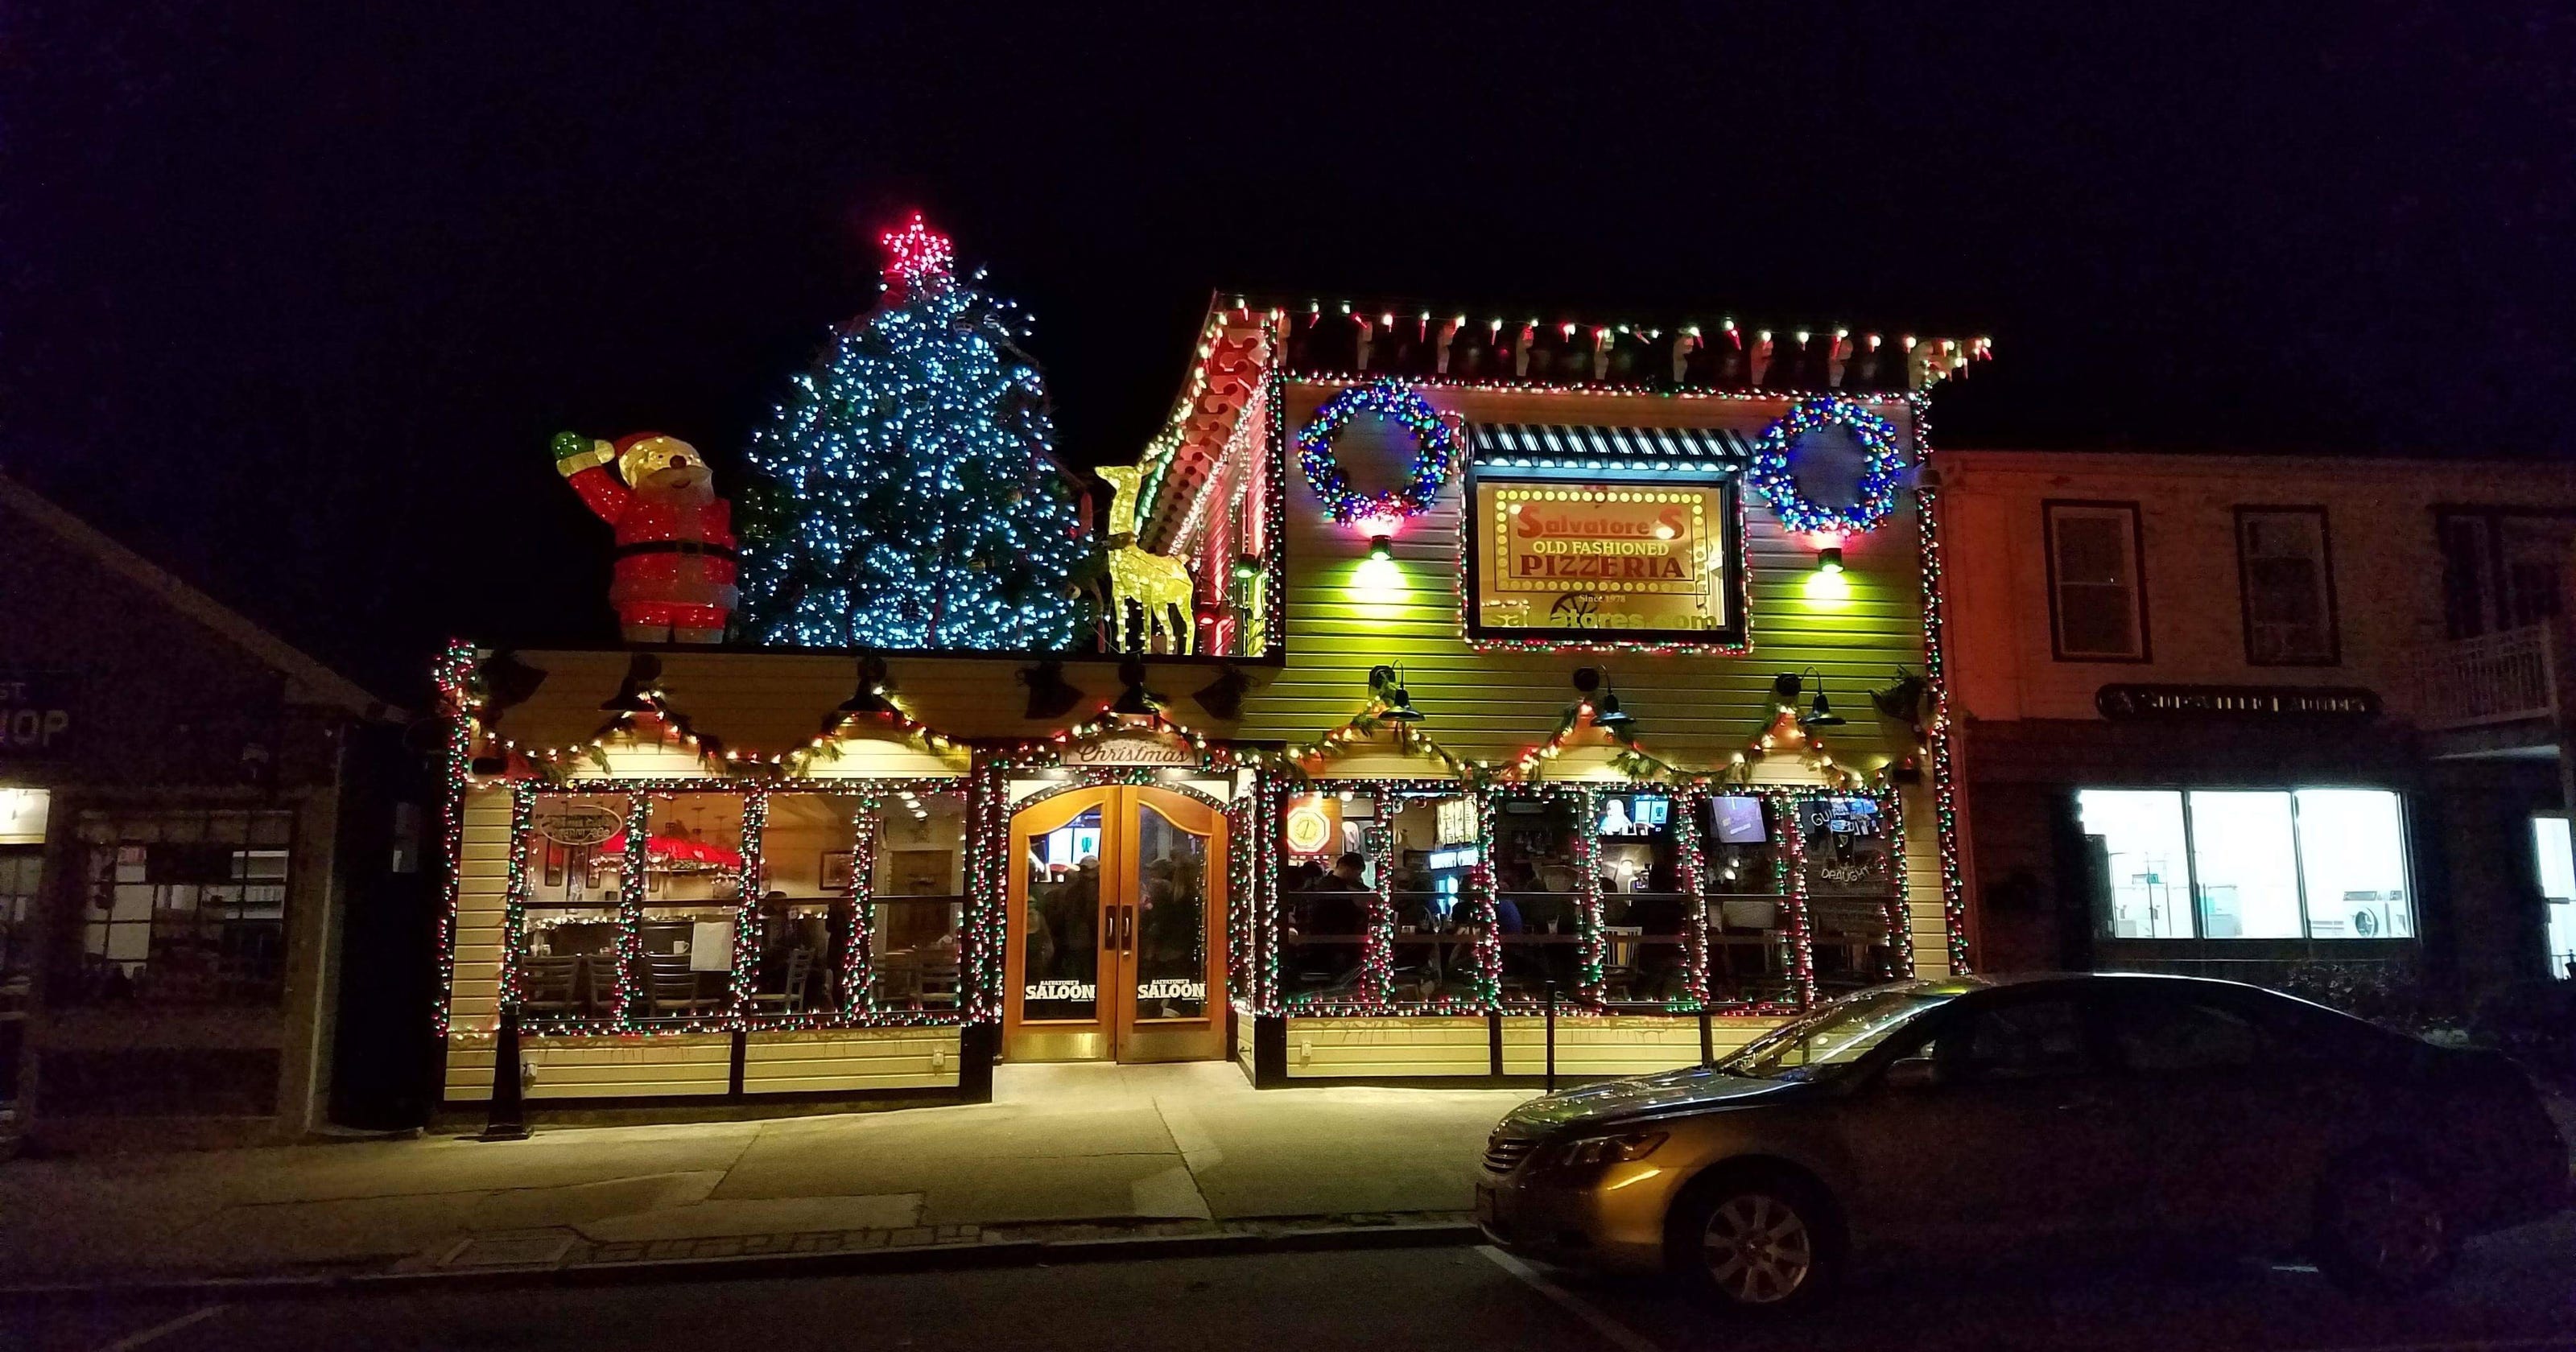 Rochester, NY, restaurants go all out with Christmas decorations, events